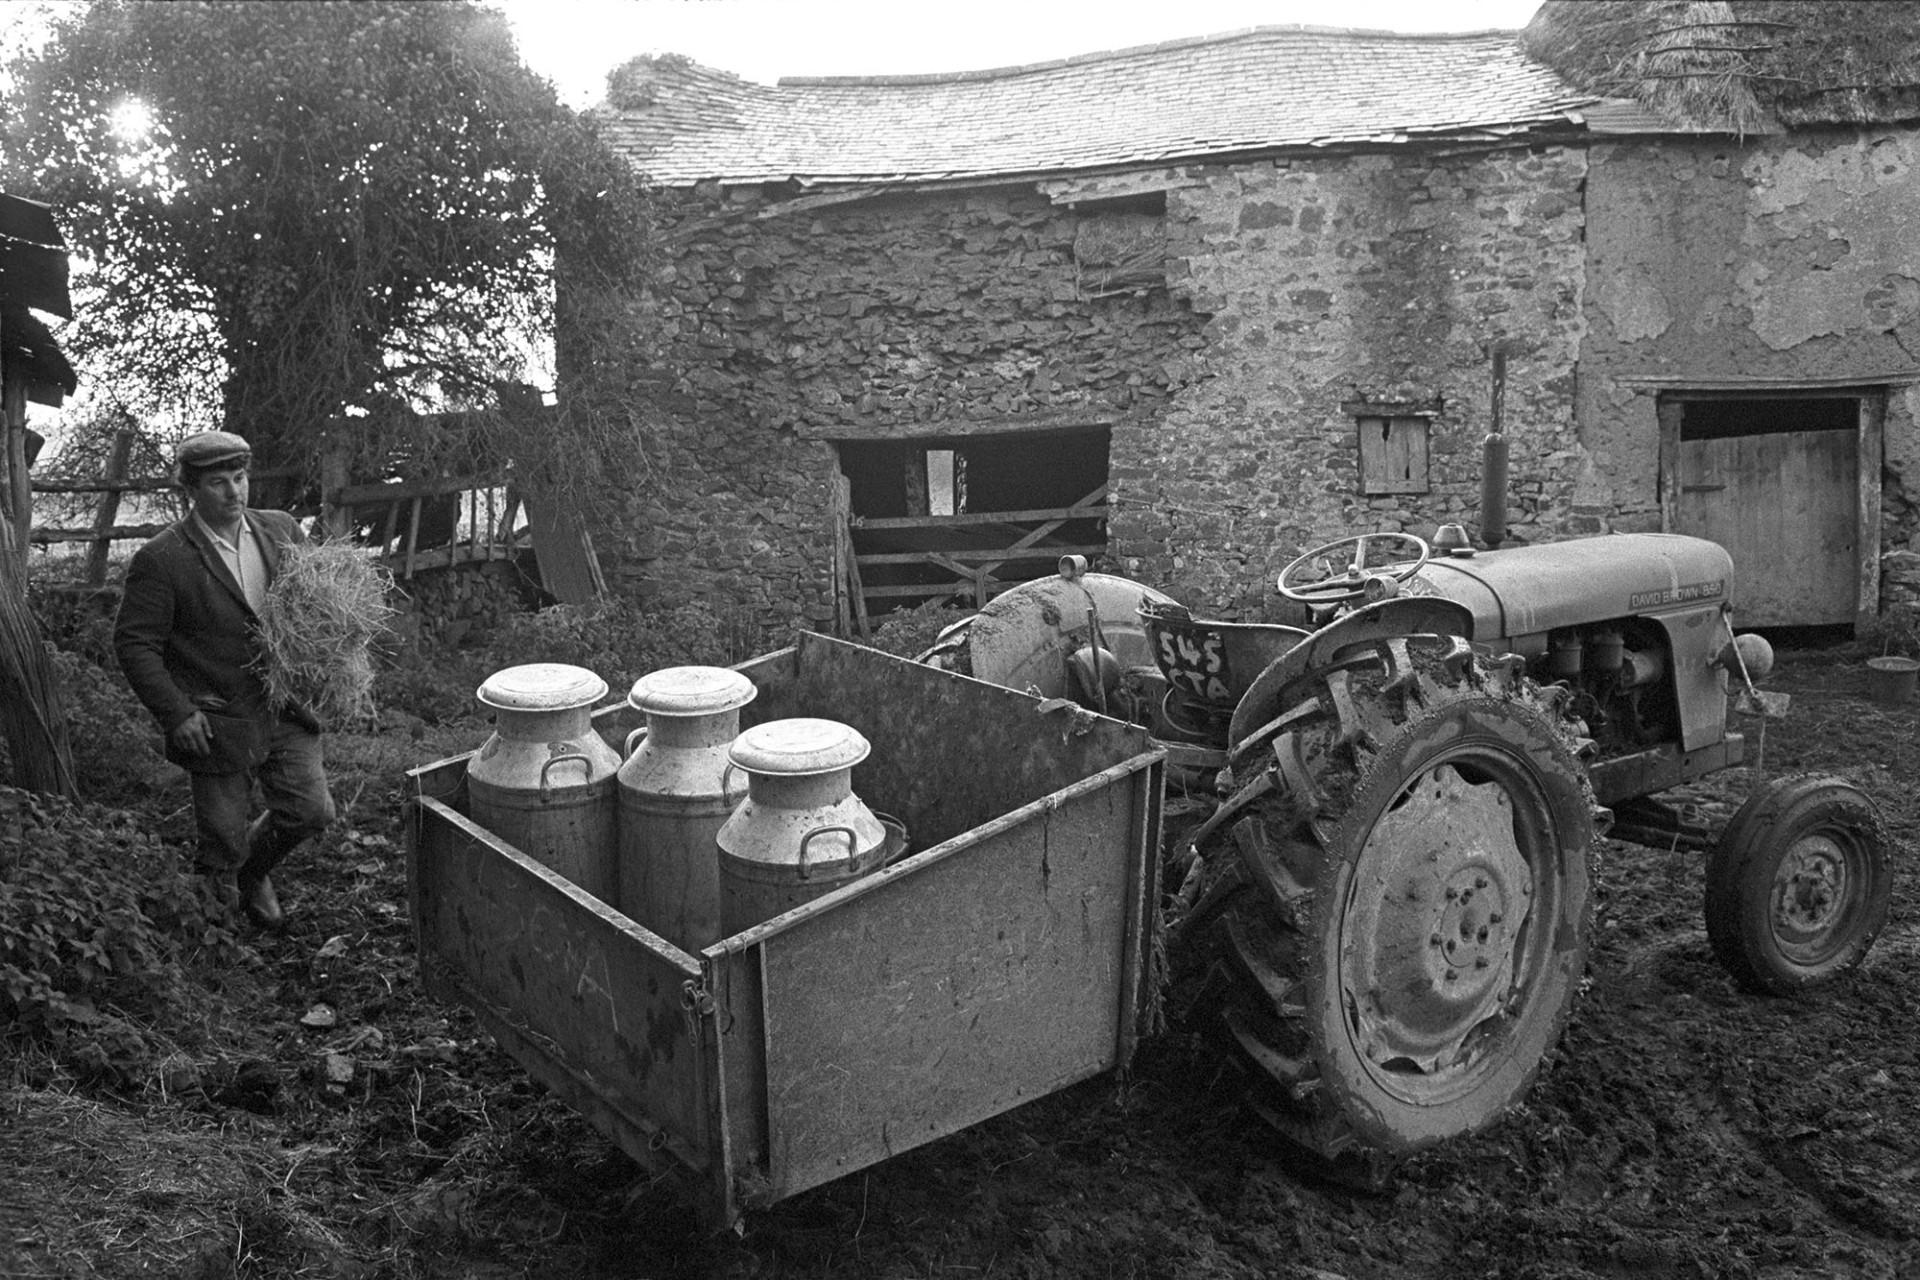 Old cob and thatch barns, farmer bringing water in churn with tractor and link box.
[Morley King carrying an armful of straw towards a tractor and link box in a muddy farmyard at Middle Week, Iddesleigh.  In the link box are three churns of water.  Two cob and stone barns, one with a thatched roof, are visible in the background.]